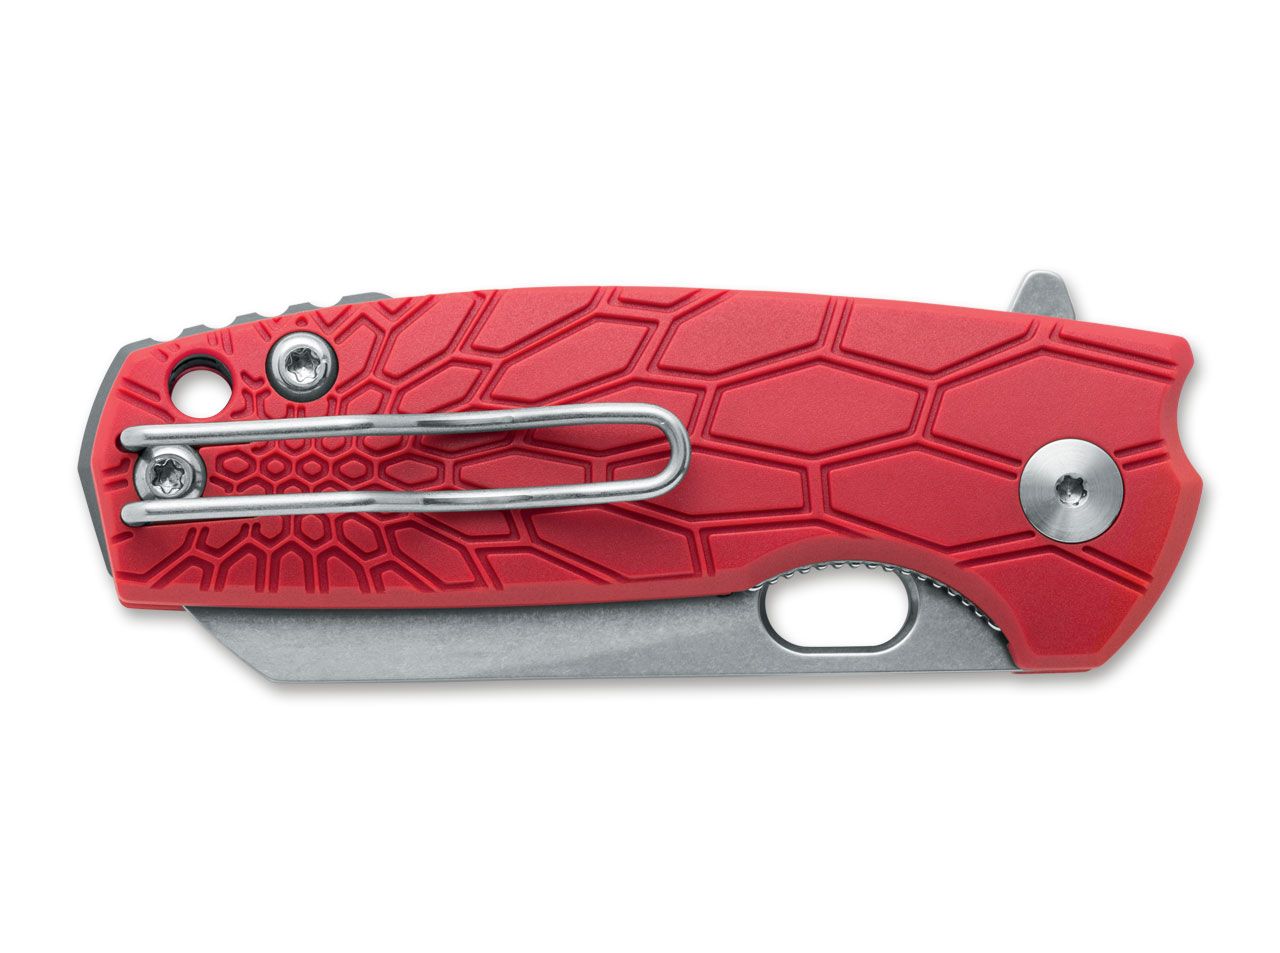 Fox Baby Core 2.36" N690Co Stonewash Red Folding Knife by Jesper Voxnaes FX-608 R